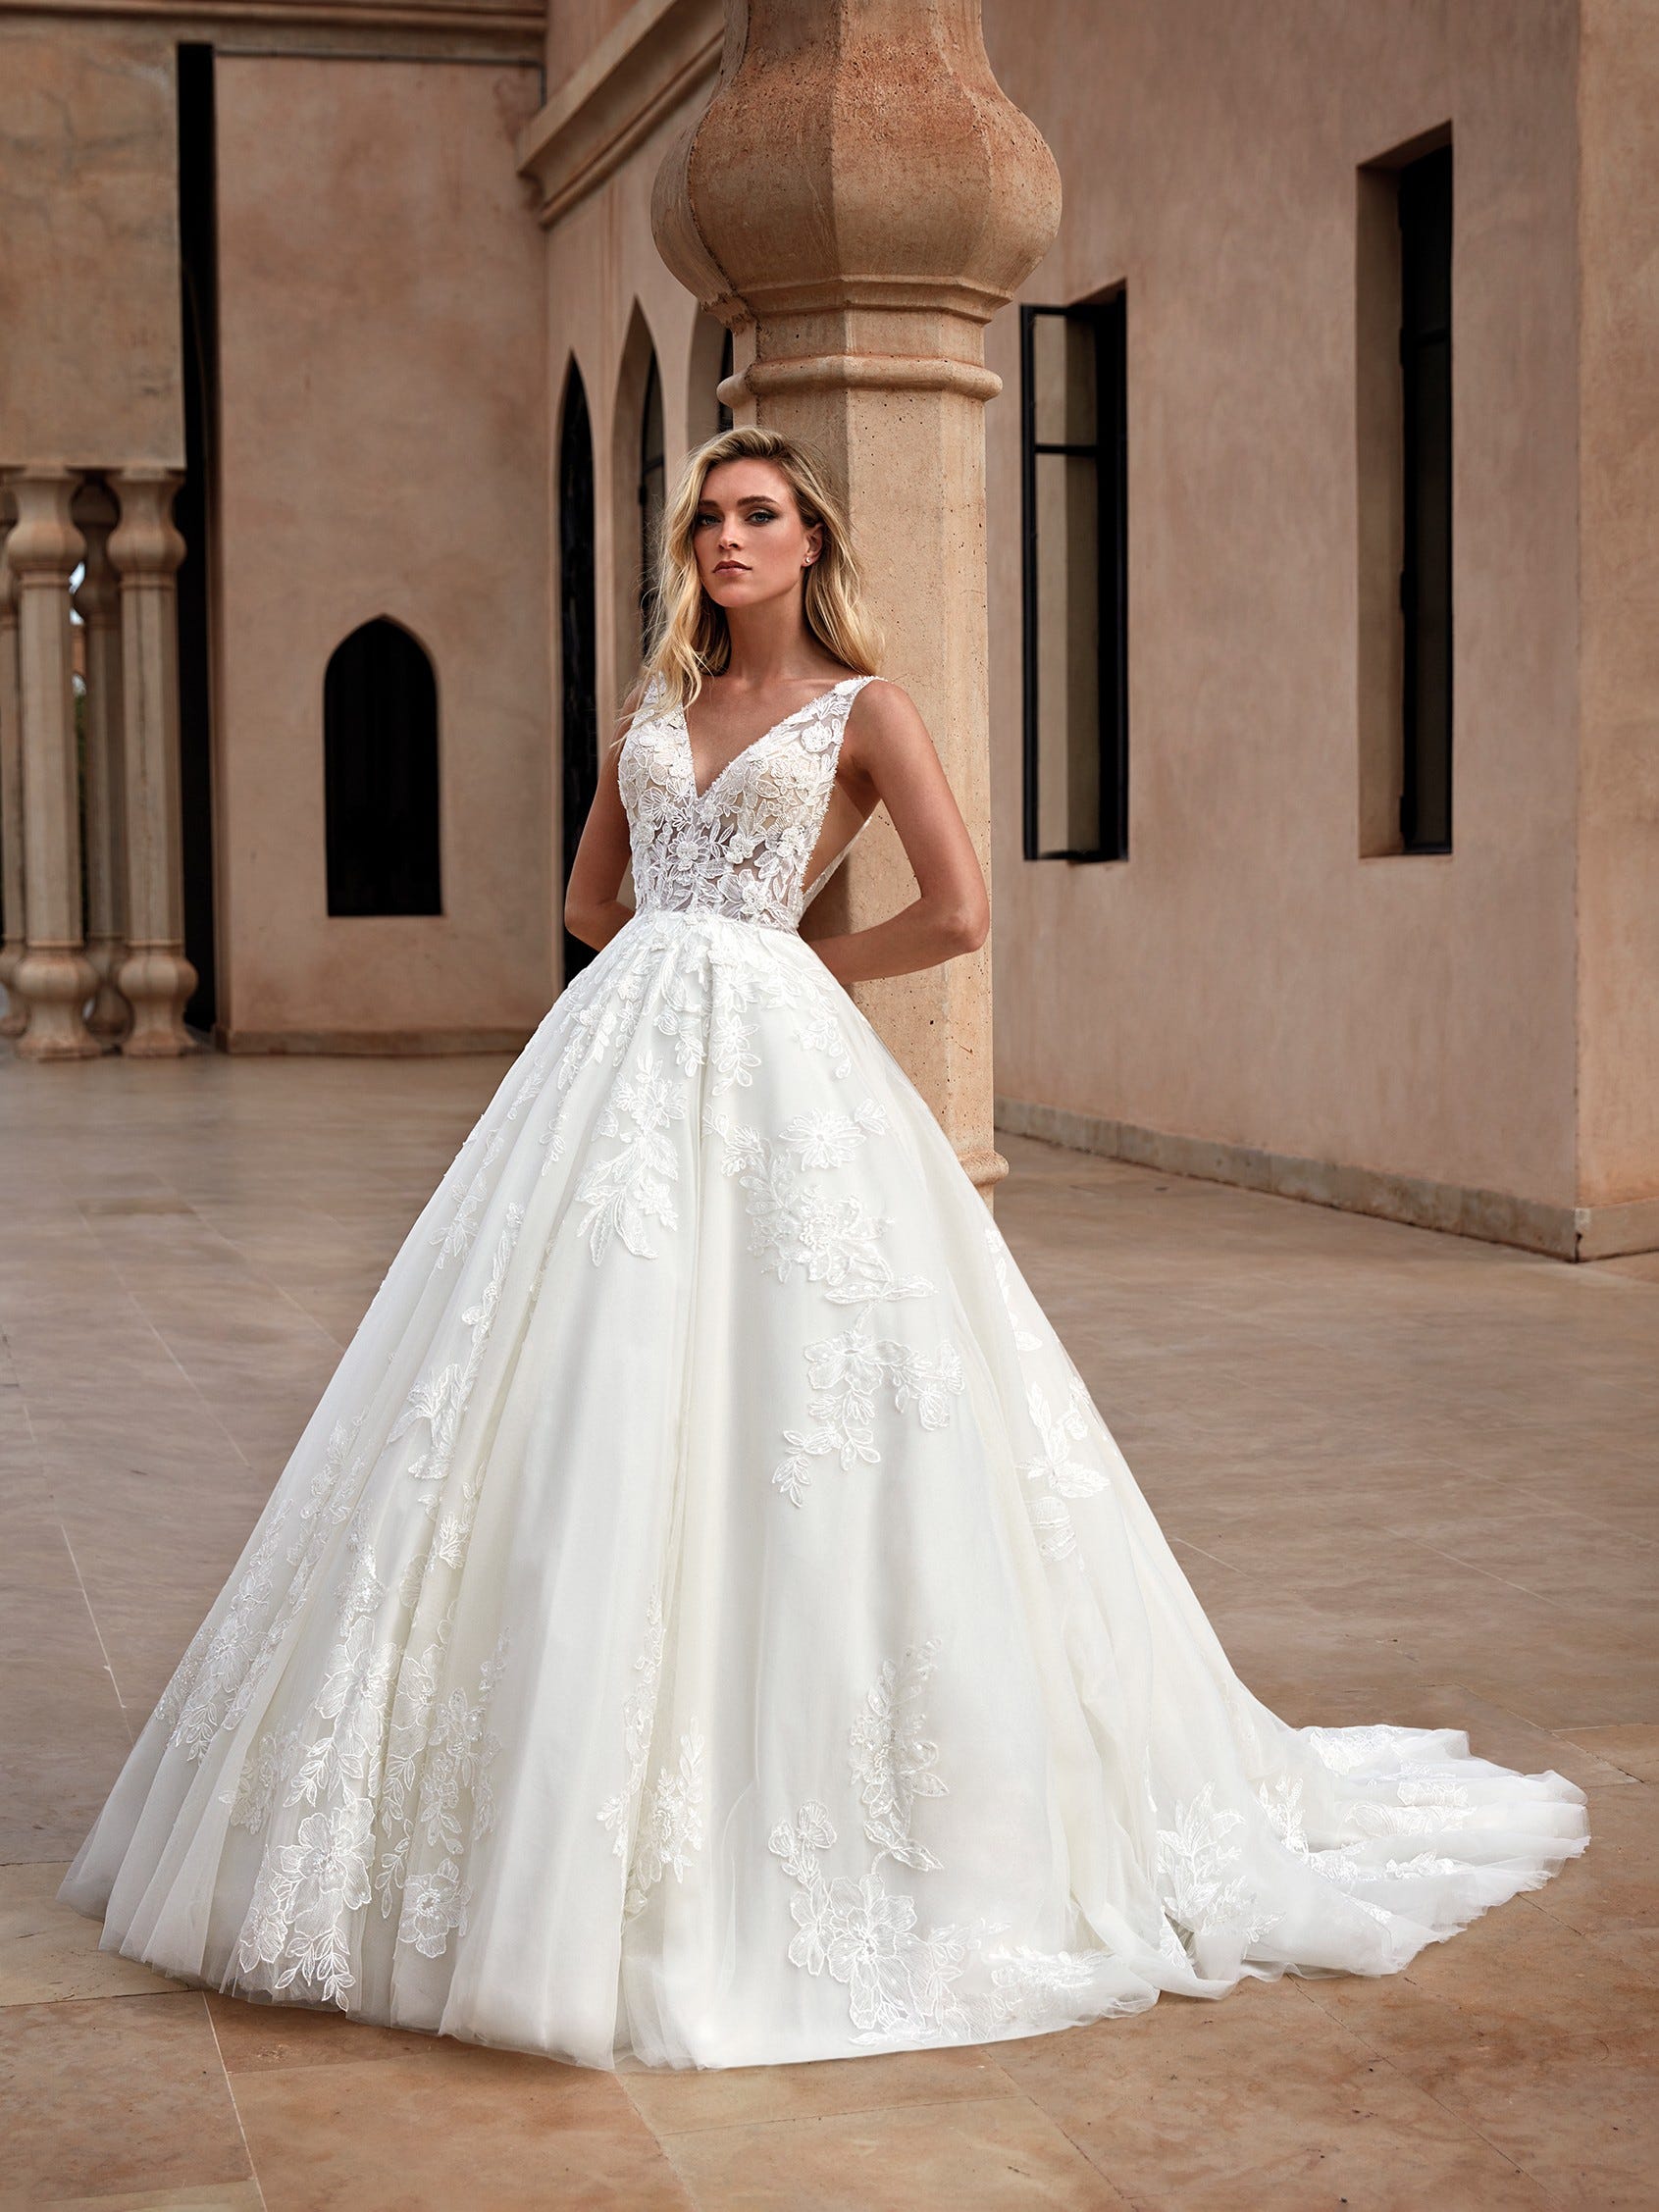 Lace Ball Gown Wedding Dress With Bow Details